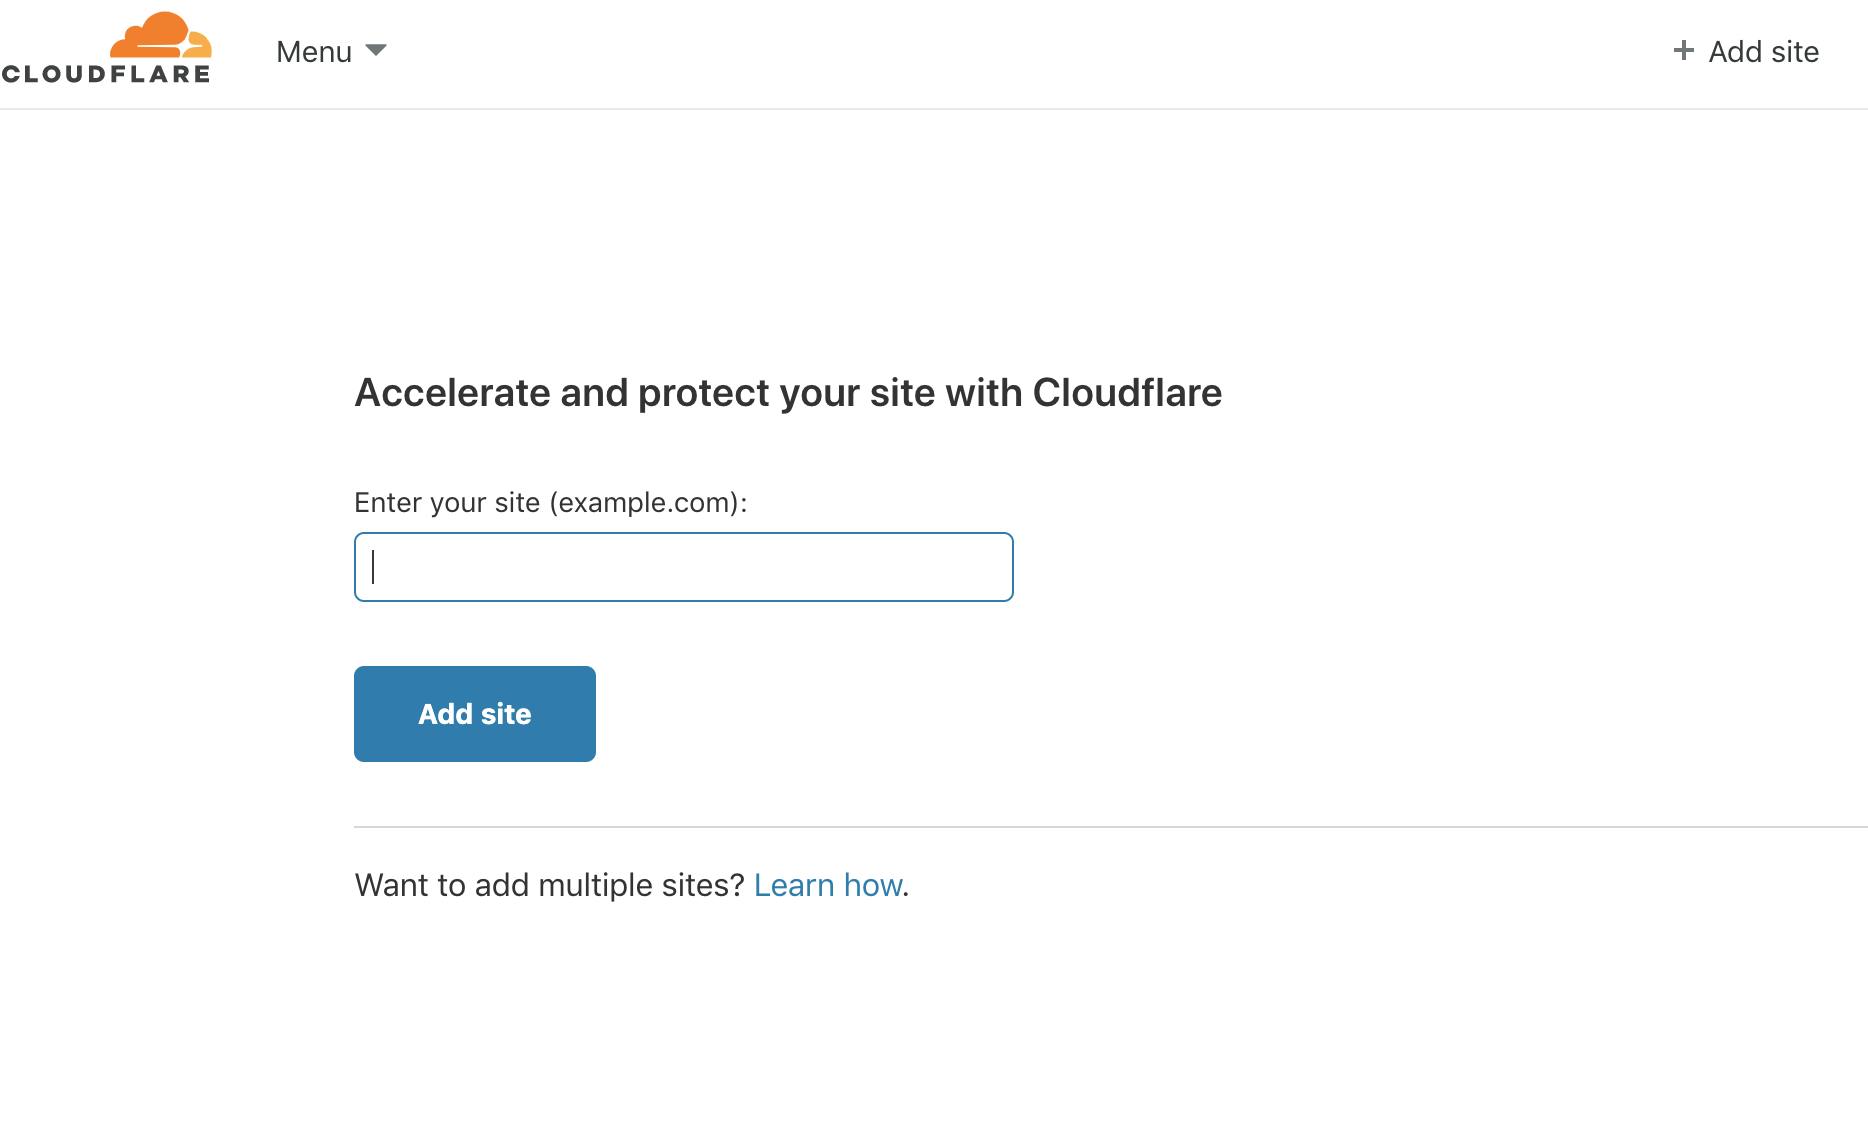 adding site to cloudflare